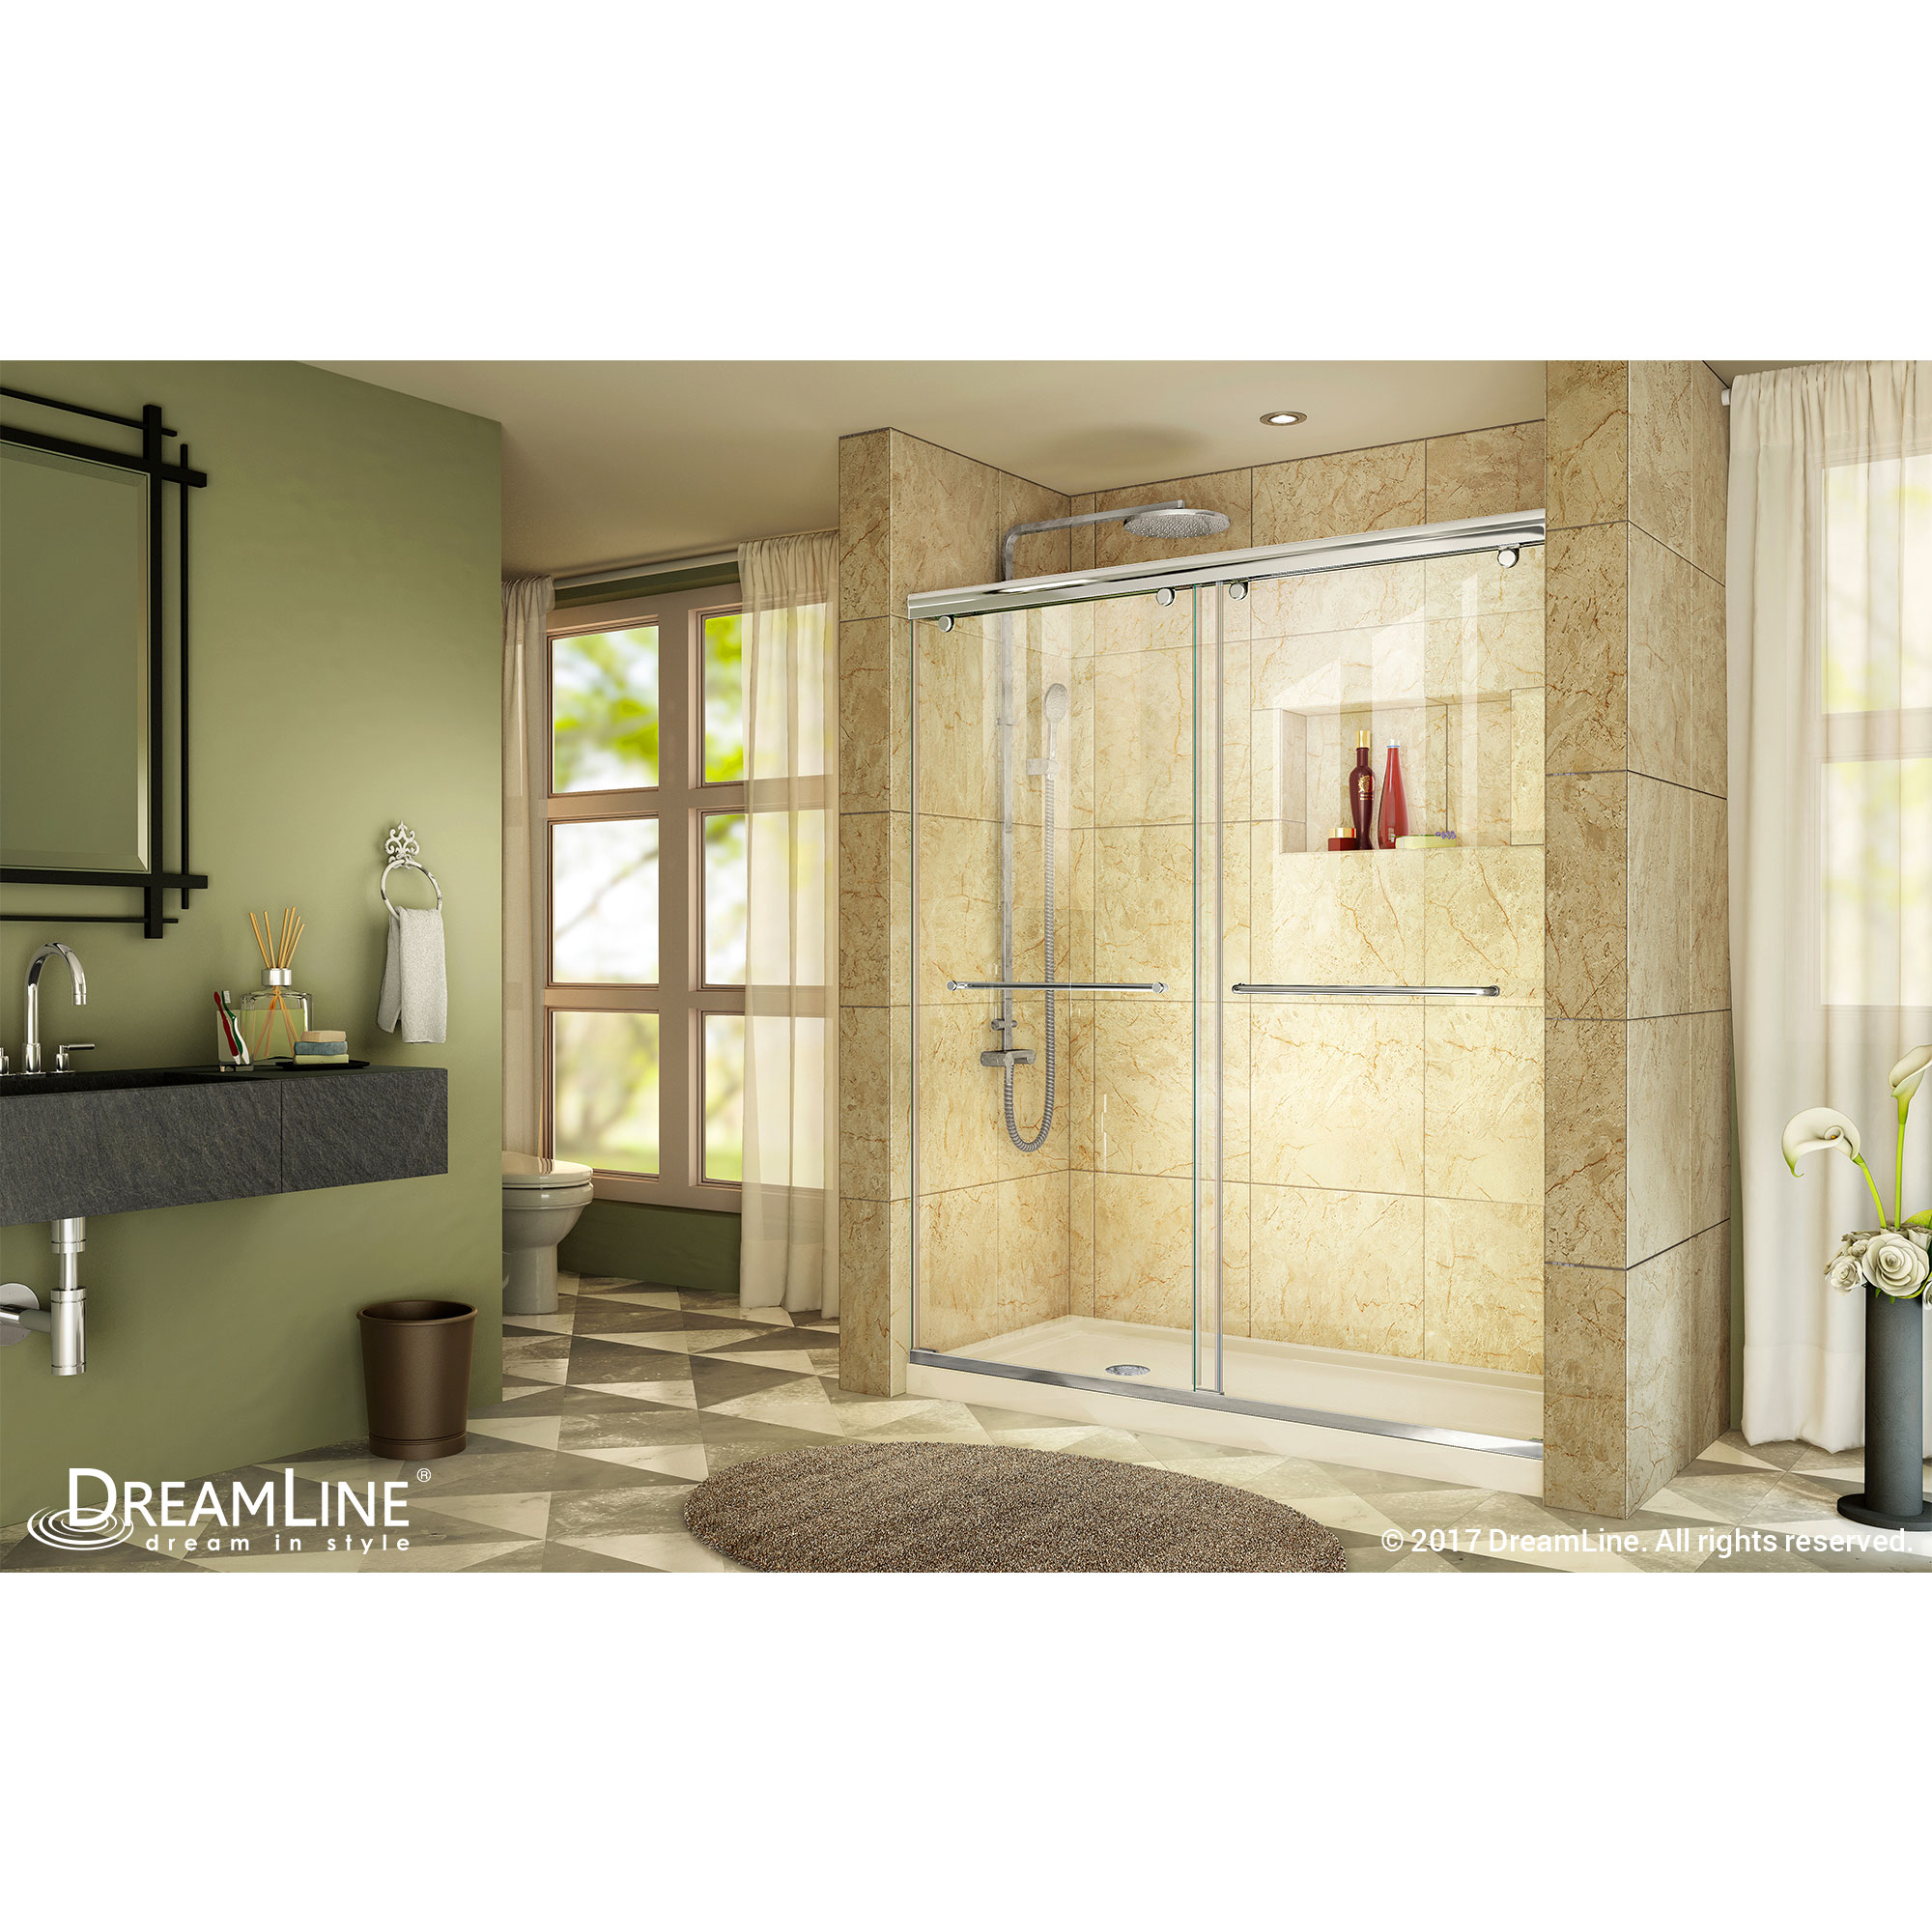 DreamLine Charisma 34 in. D x 60 in. W x 78 3/4 in. H Bypass Shower Door in Chrome with Left Drain Biscuit Base Kit